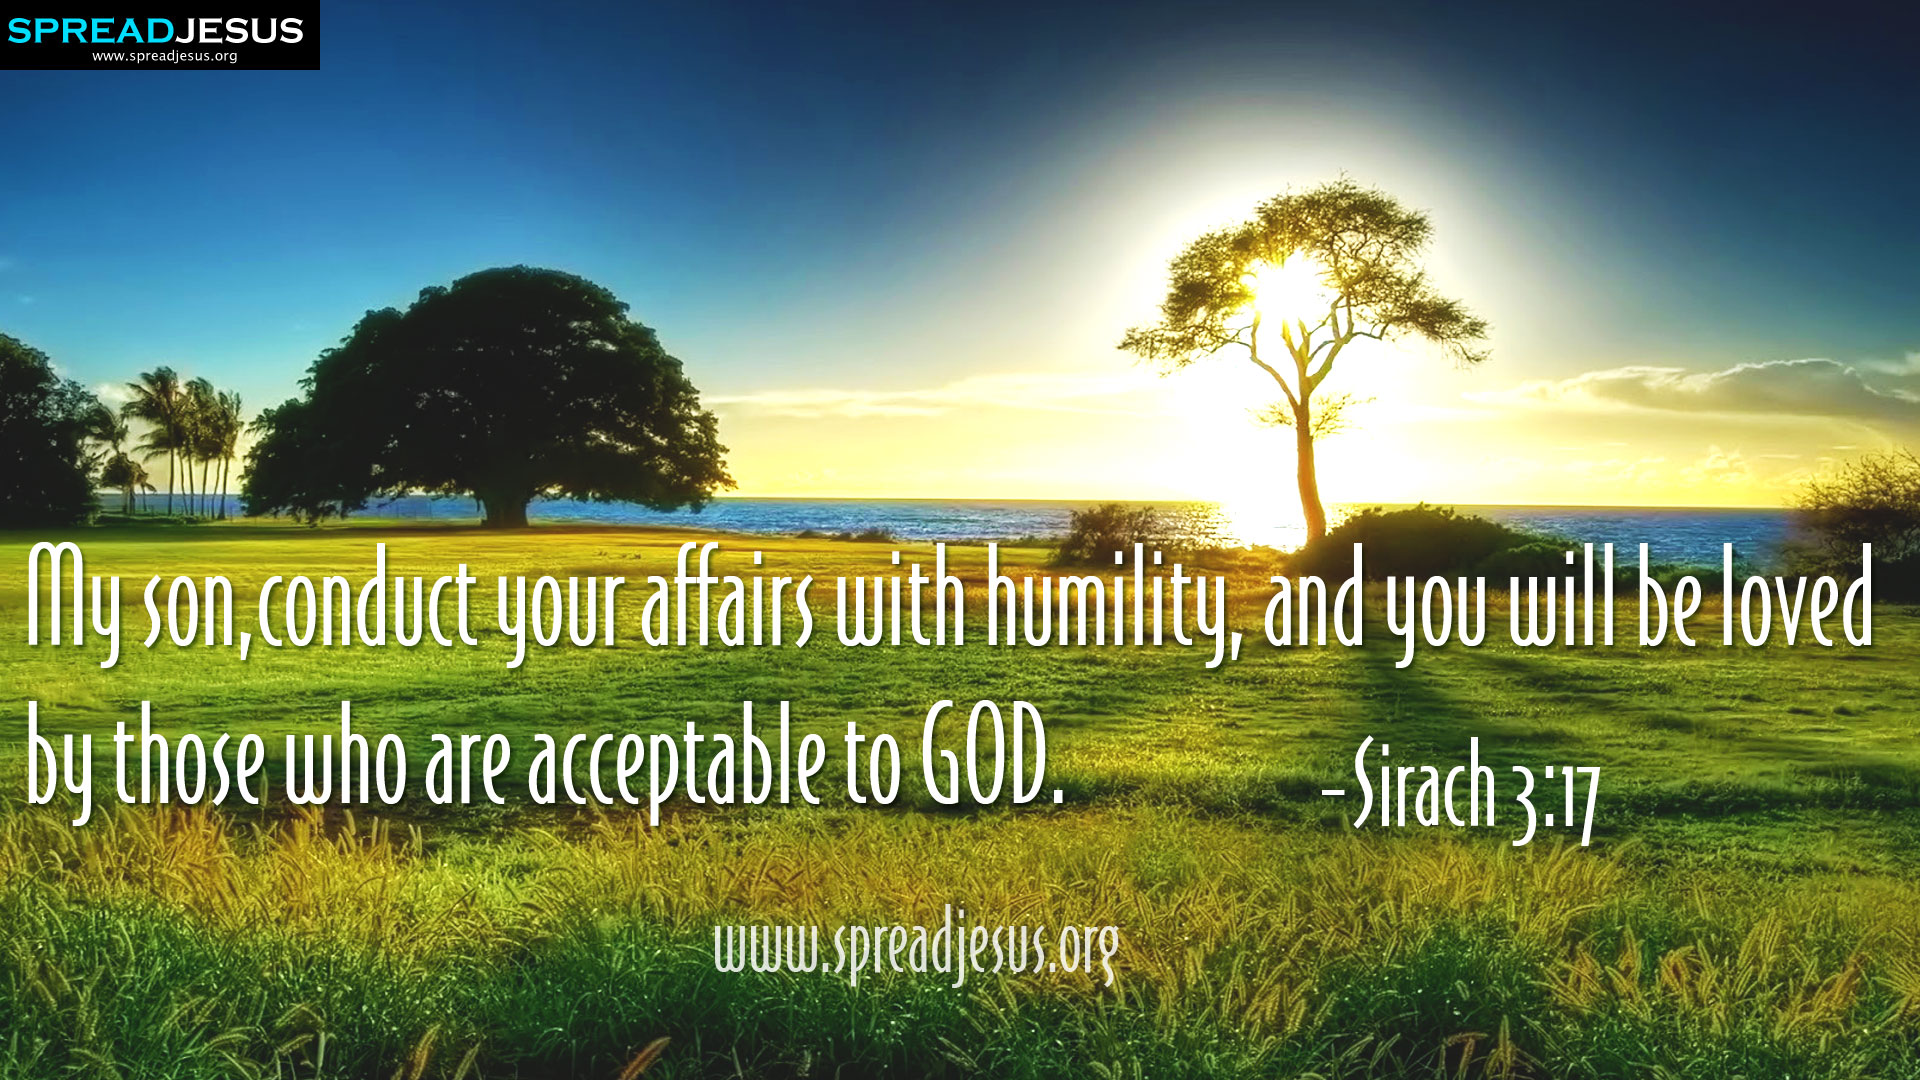 My sonconduct your affairs with humility and you will be loved by